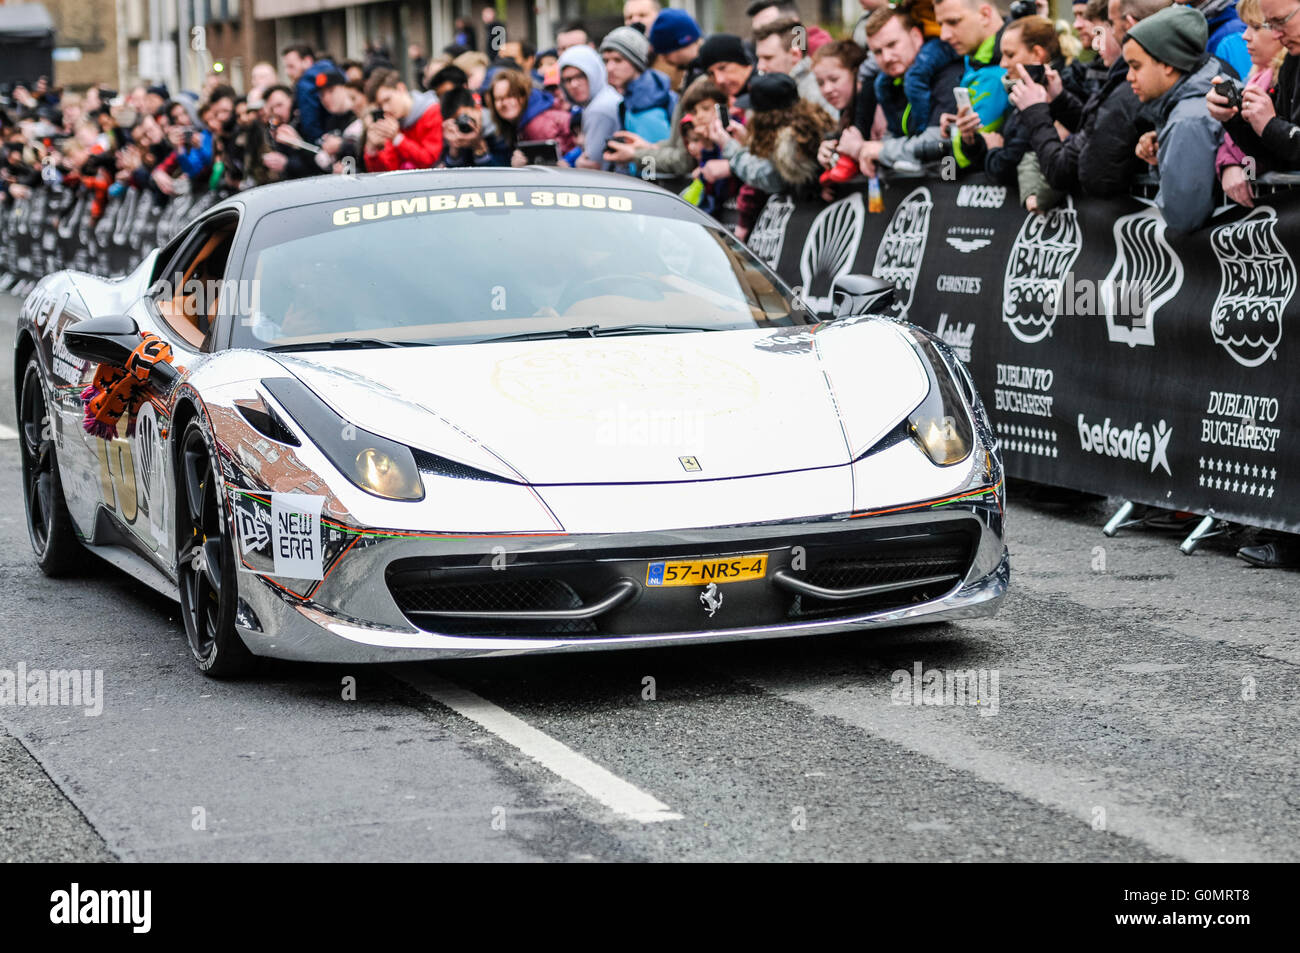 DUBLIN, IRELAND. MAY 01 2016 - A Ferarri with silver mirrored paintwork starts the 6 day drive to Bucharest from Dublin as it competes in the Gumball 3000 rally. Stock Photo